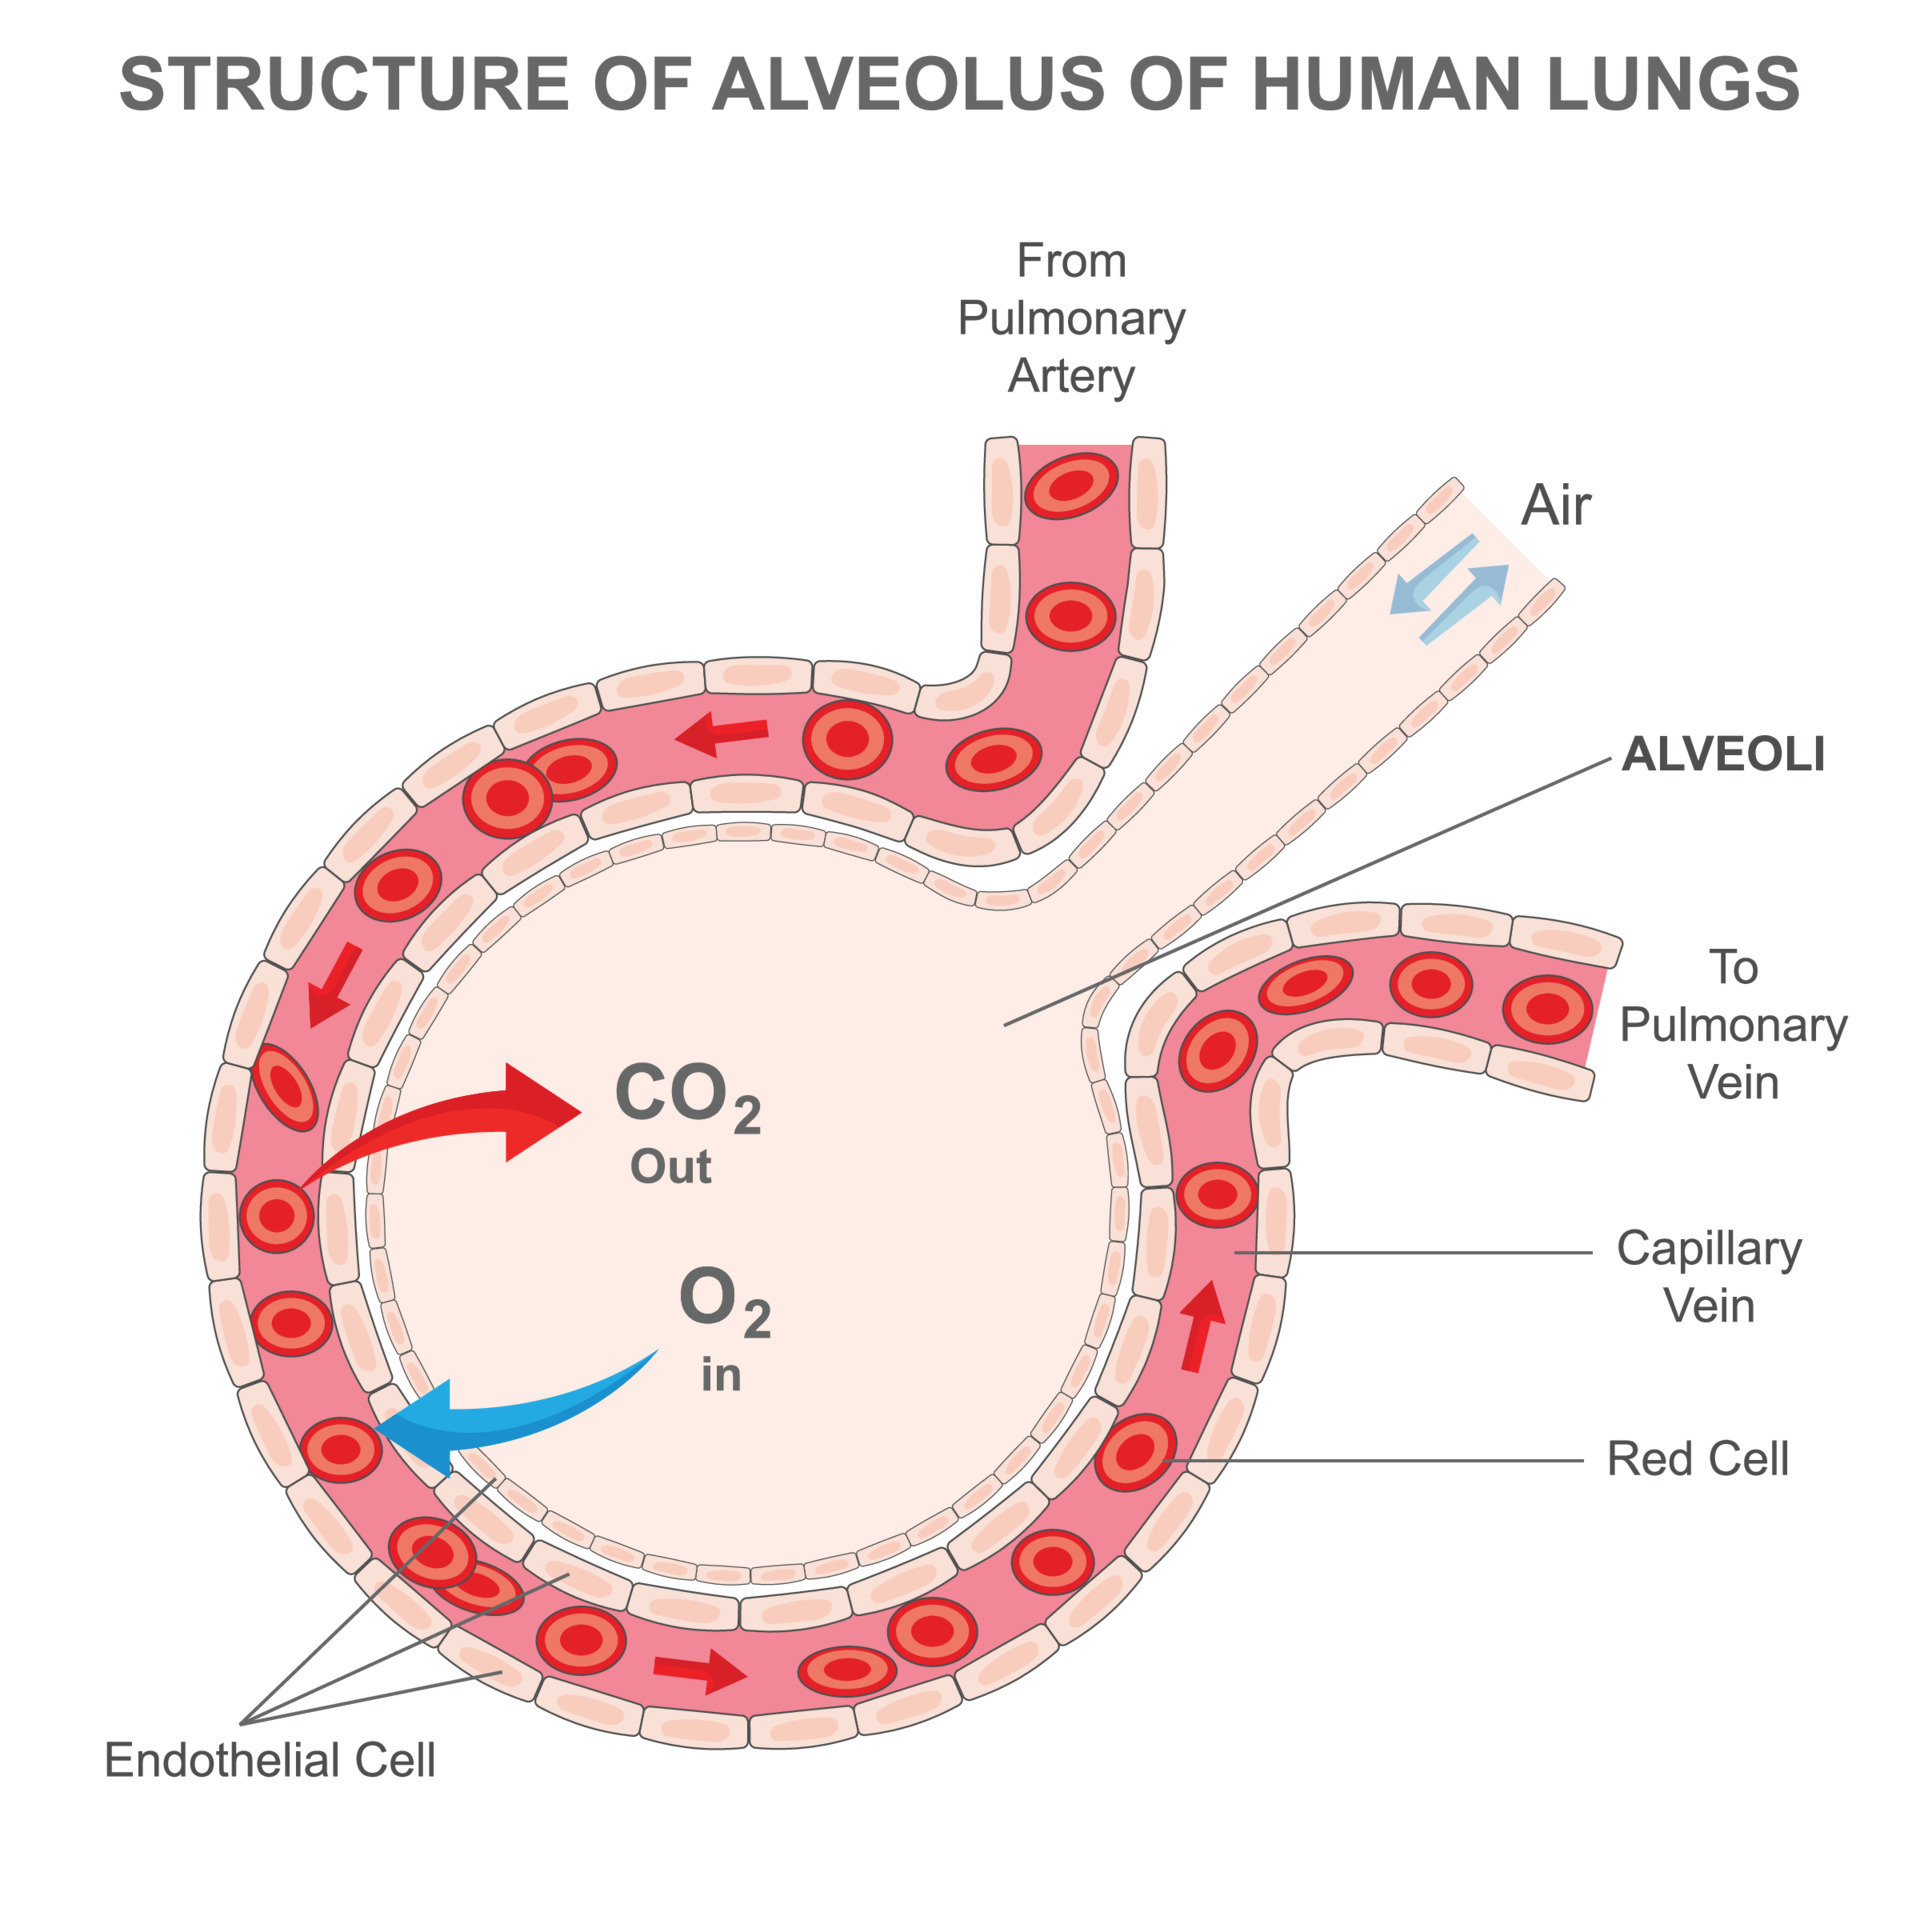 Alveolus Of Human Lungs Oxygen And Carbon Dioxide Move In Alveoli